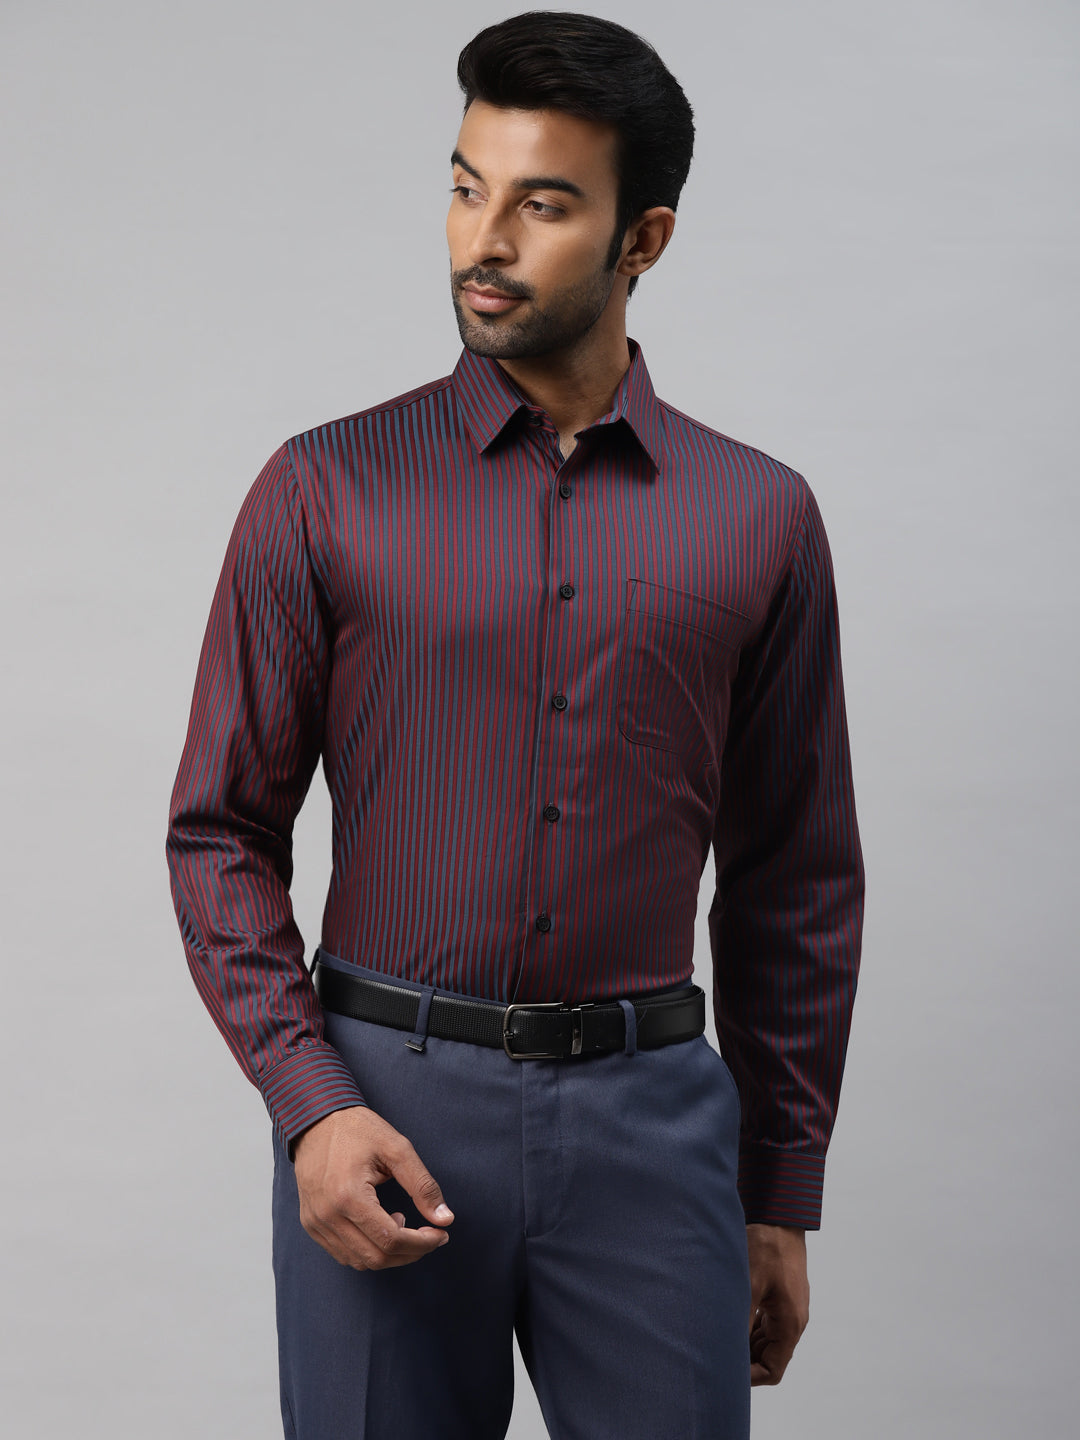 Don Vino Men's Red With Blue Stripes Slim Fit Shirt